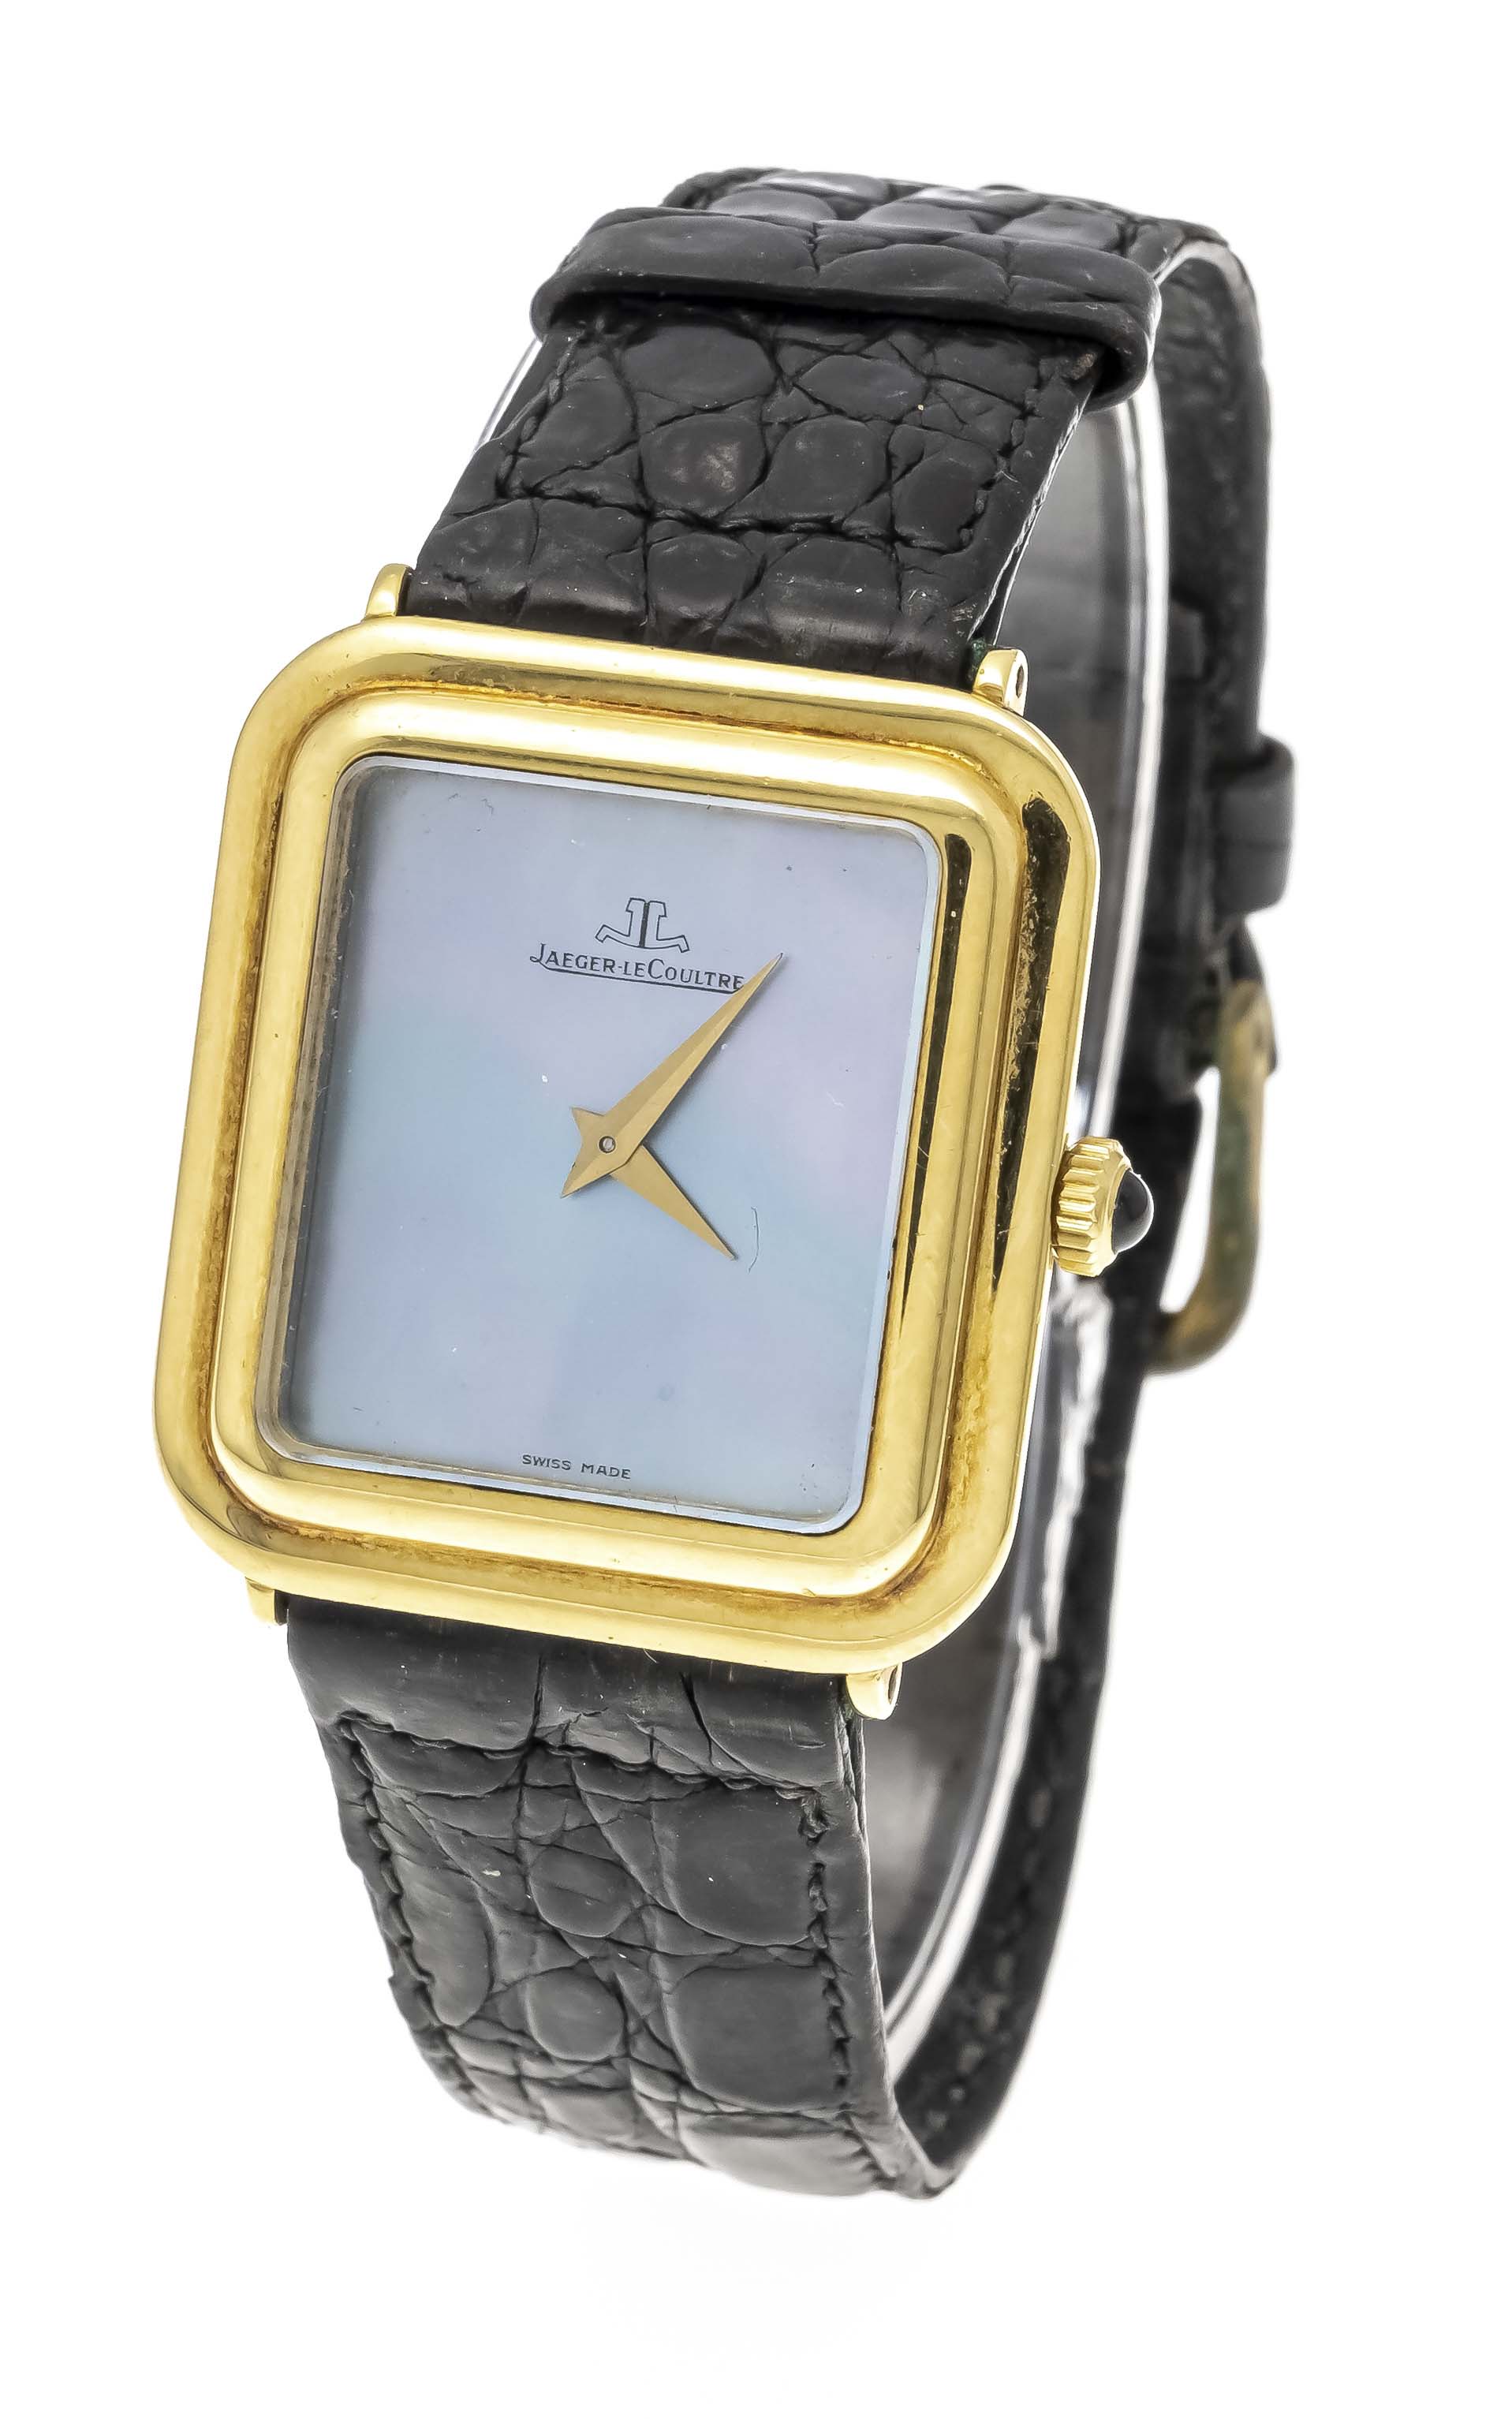 Jaeger LeCoultre, ref. 6031.21, 750/000 GG, circa 1970, manual winding cal. 841 running, mother-of-